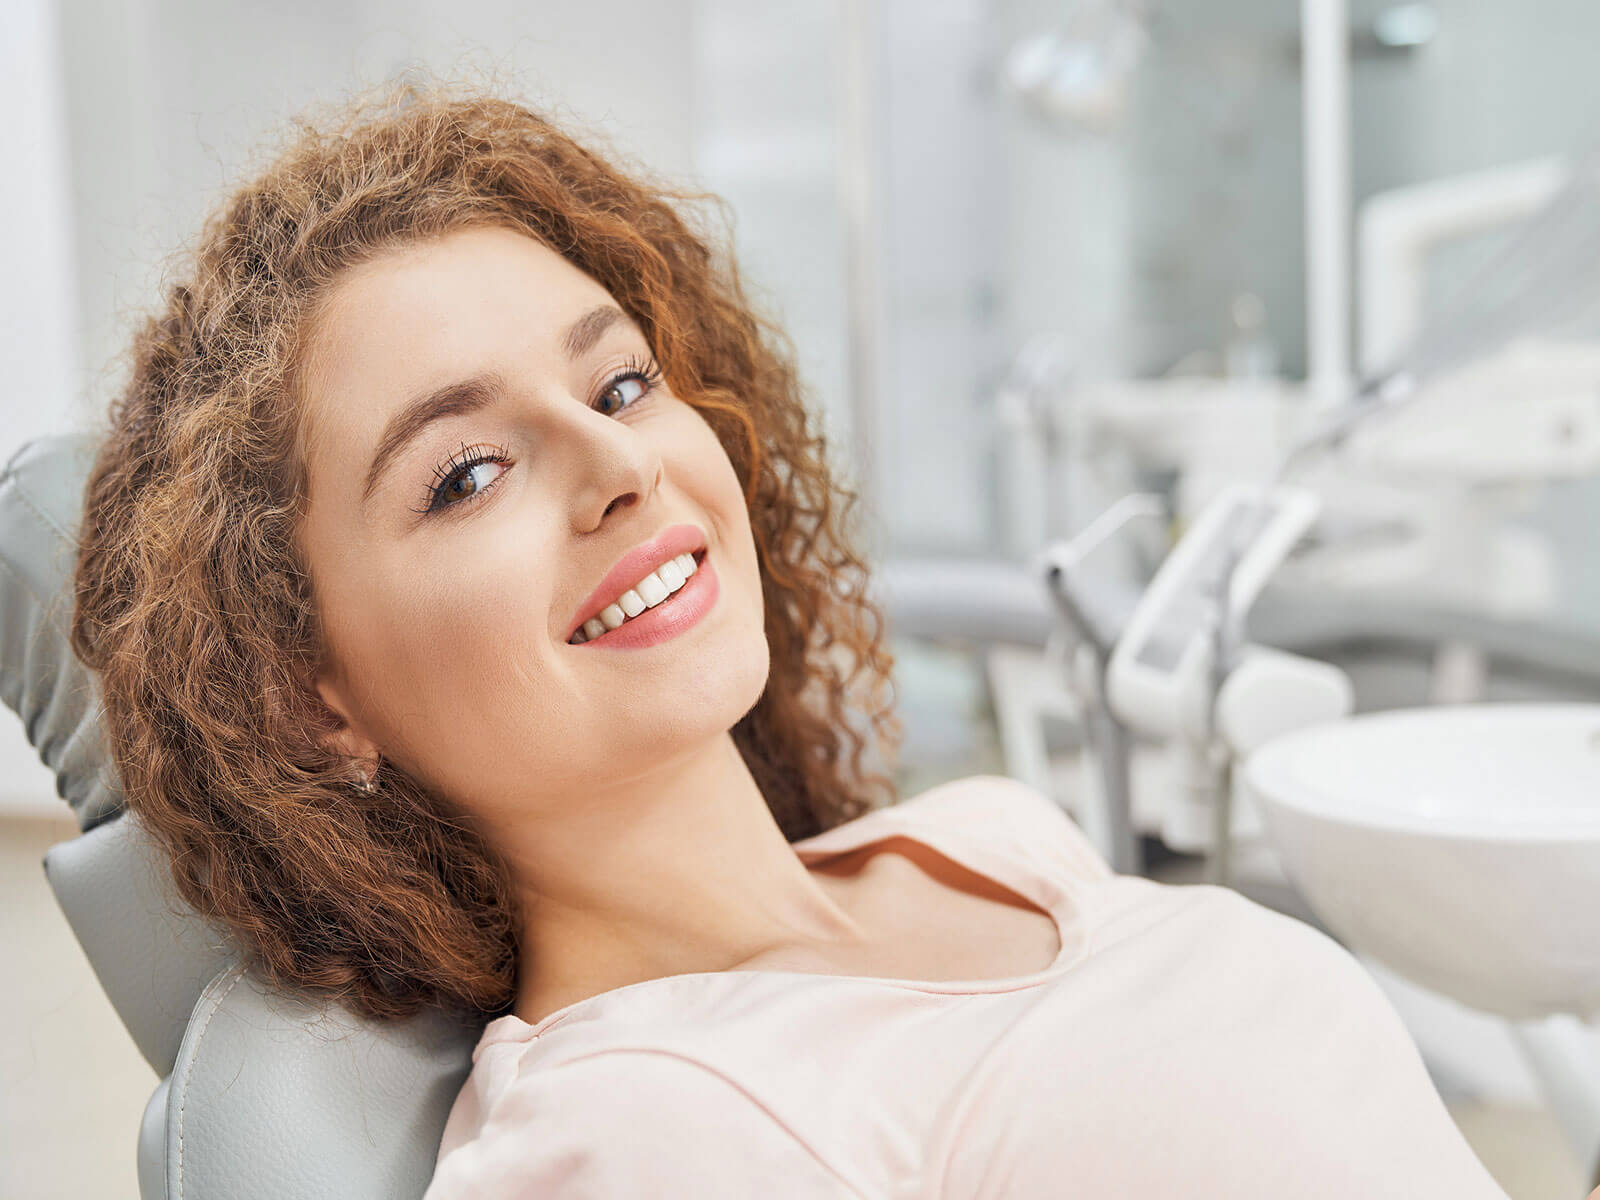 5 Benefits Of A Beautiful And Confident Smile